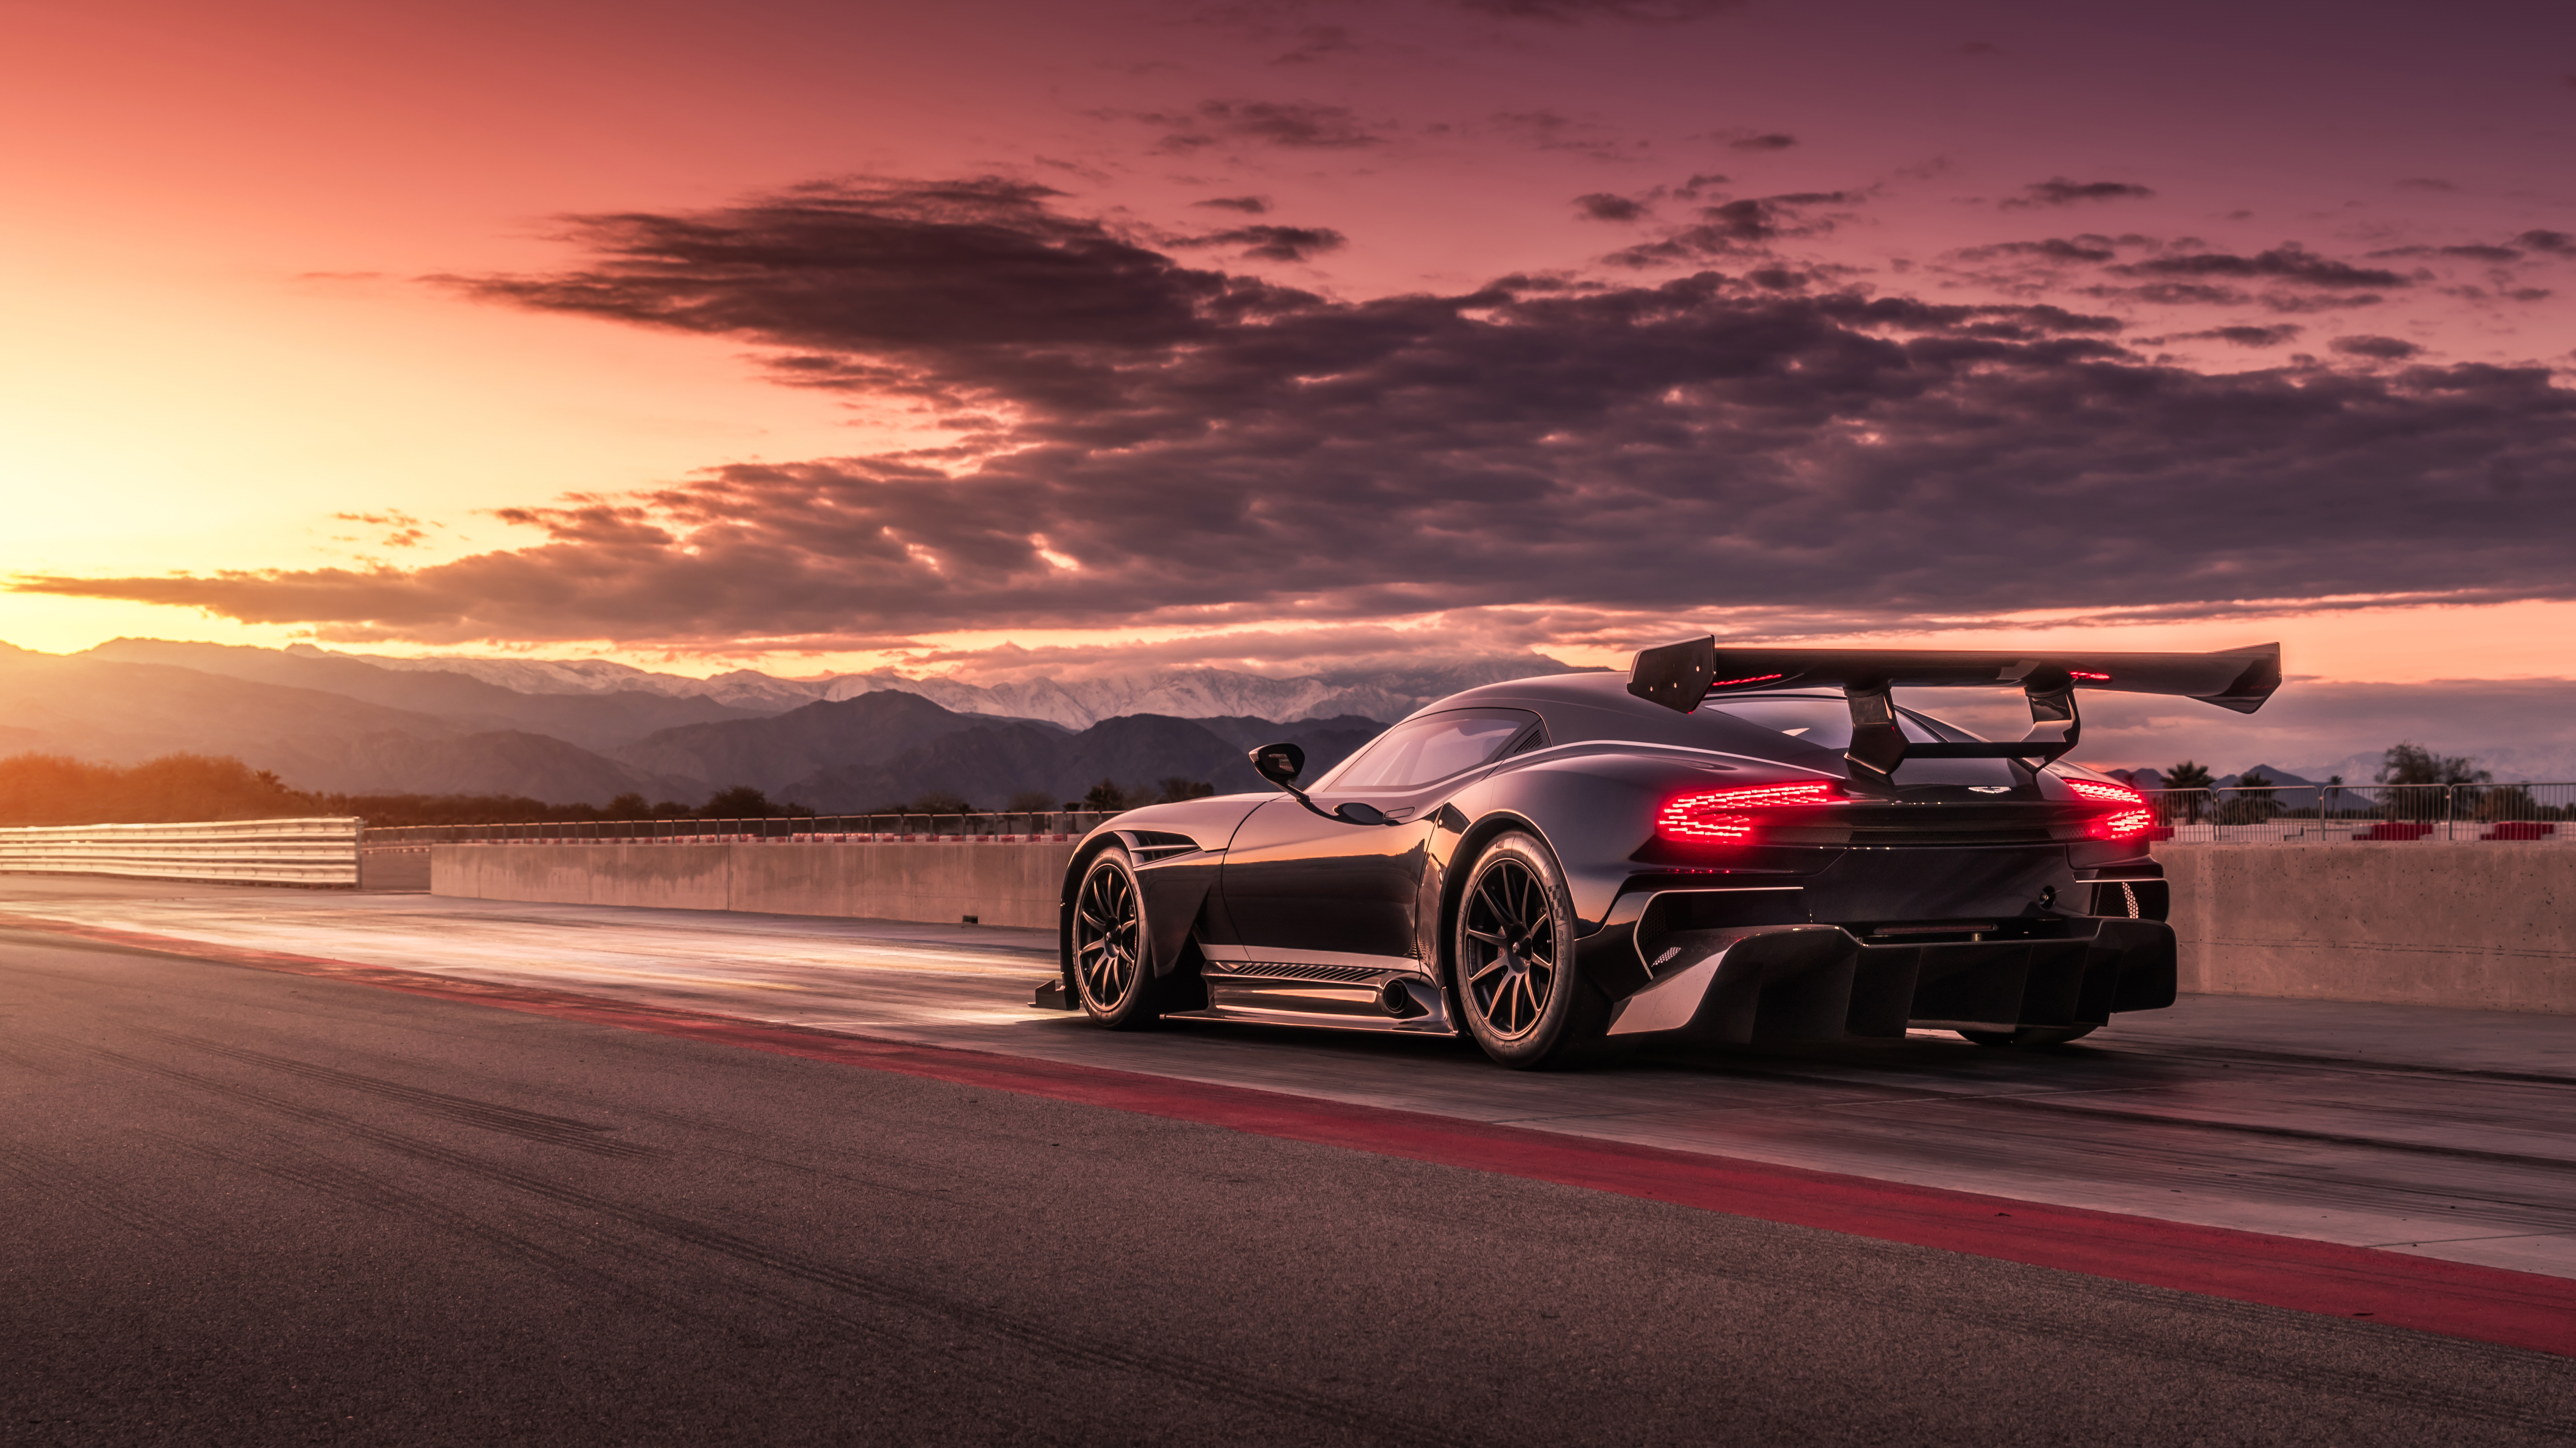 Aston Martin Vulcan 8k - Aston Martin Vulcan 4k , HD Wallpaper & Backgrounds